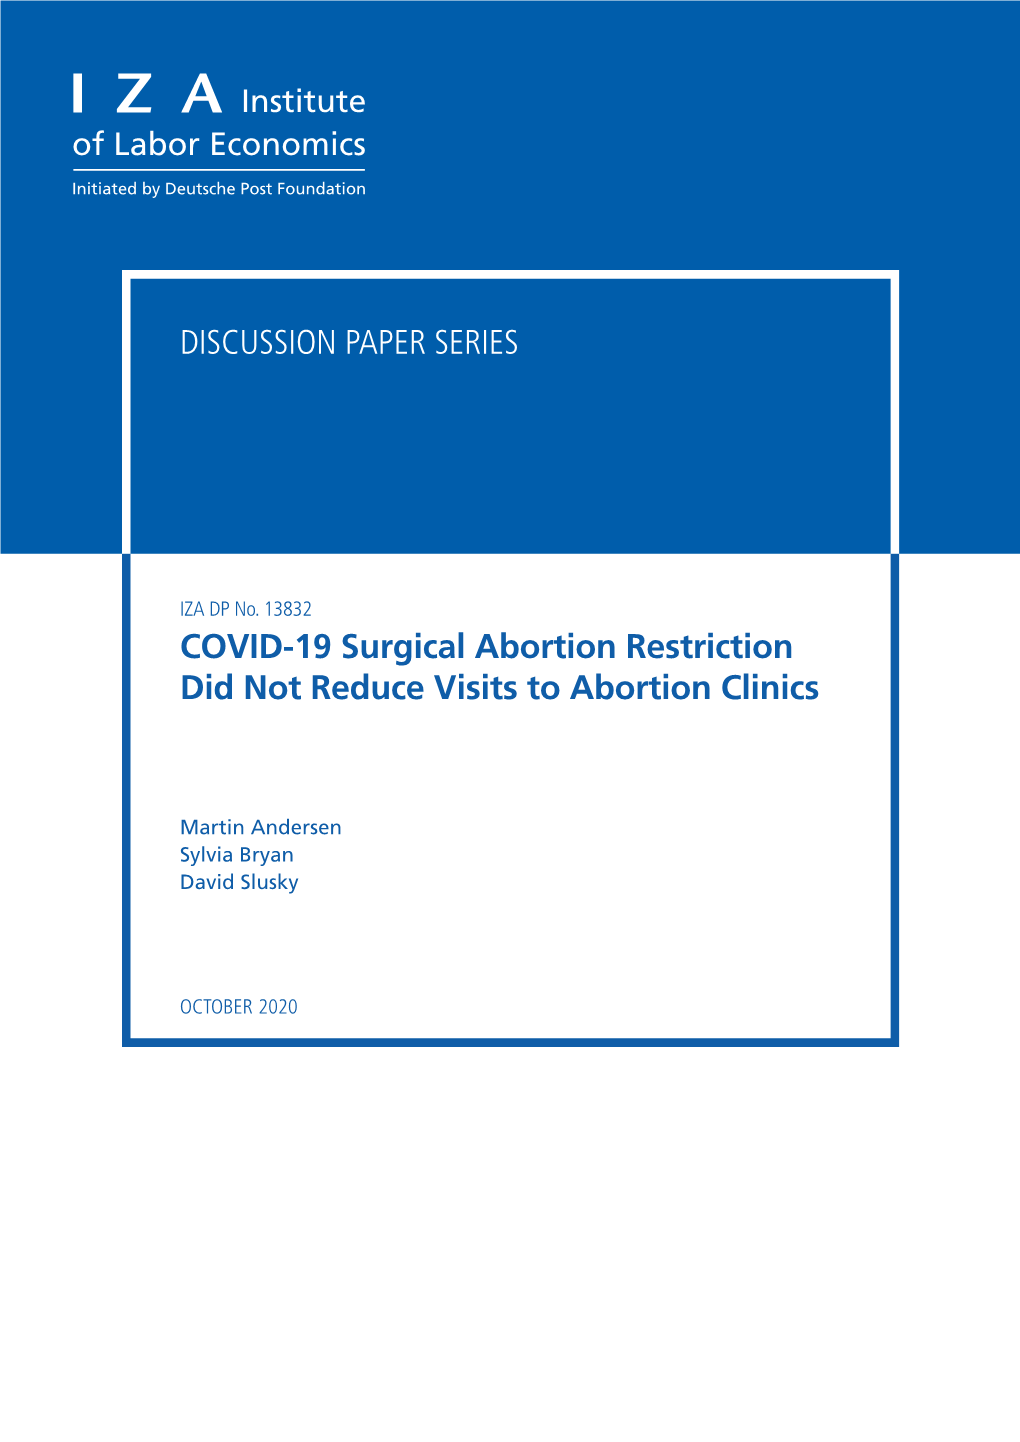 COVID-19 Surgical Abortion Restriction Did Not Reduce Visits to Abortion Clinics